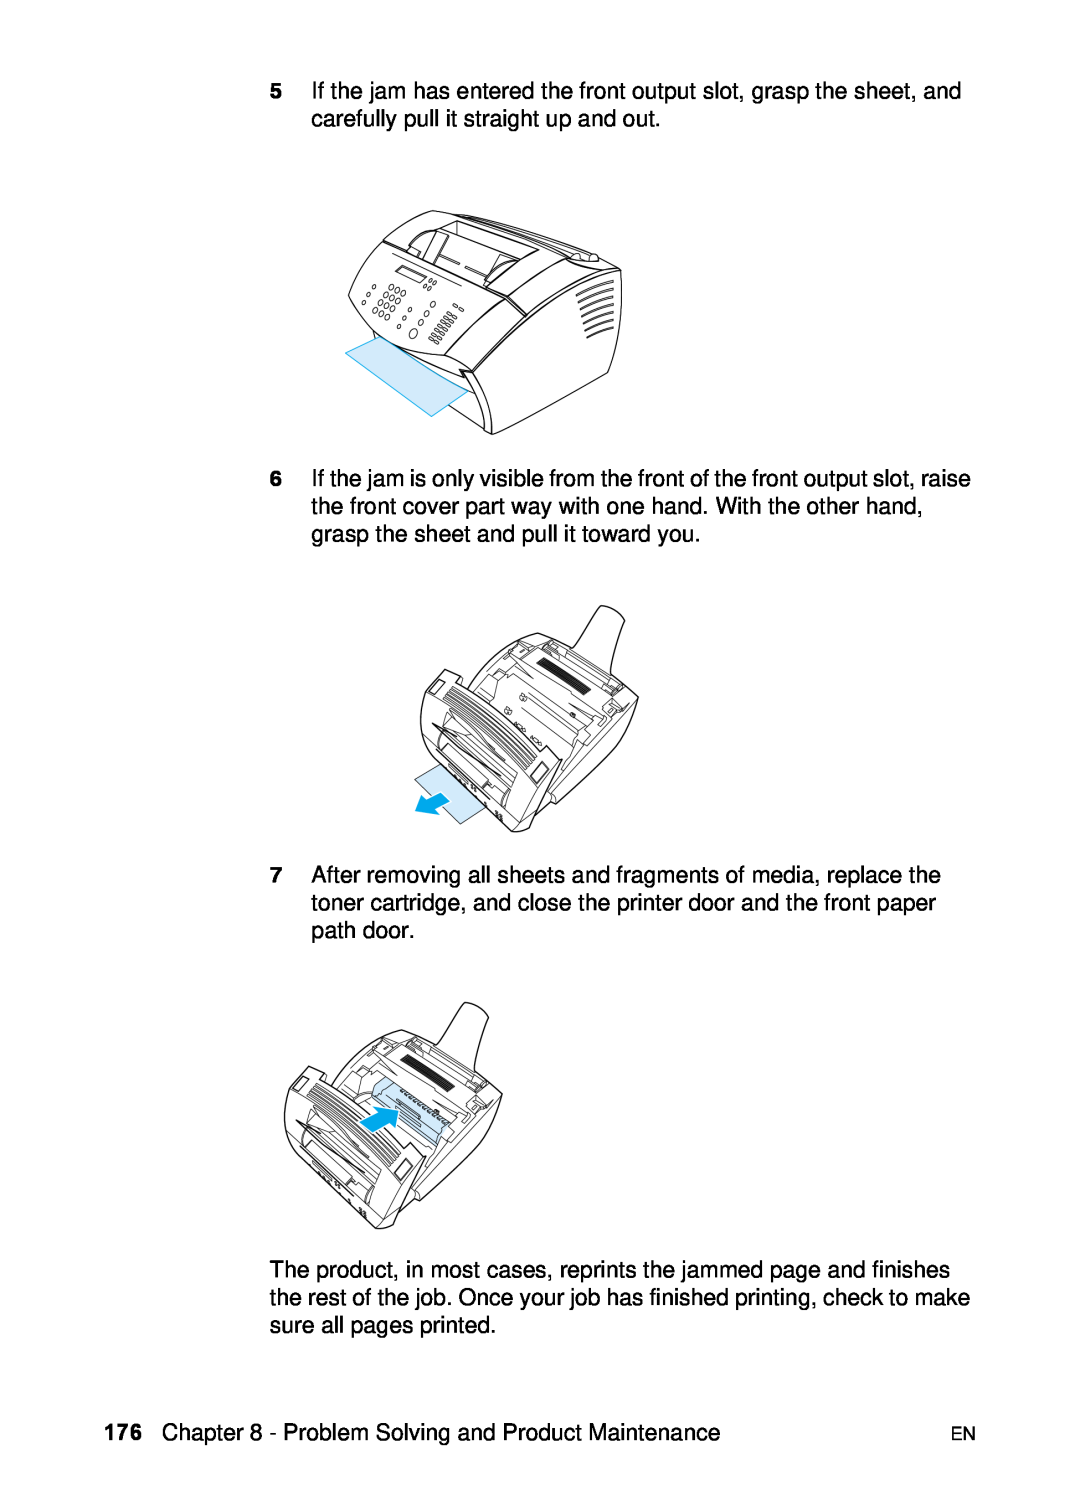 HP 3200 manual Problem Solving and Product Maintenance 